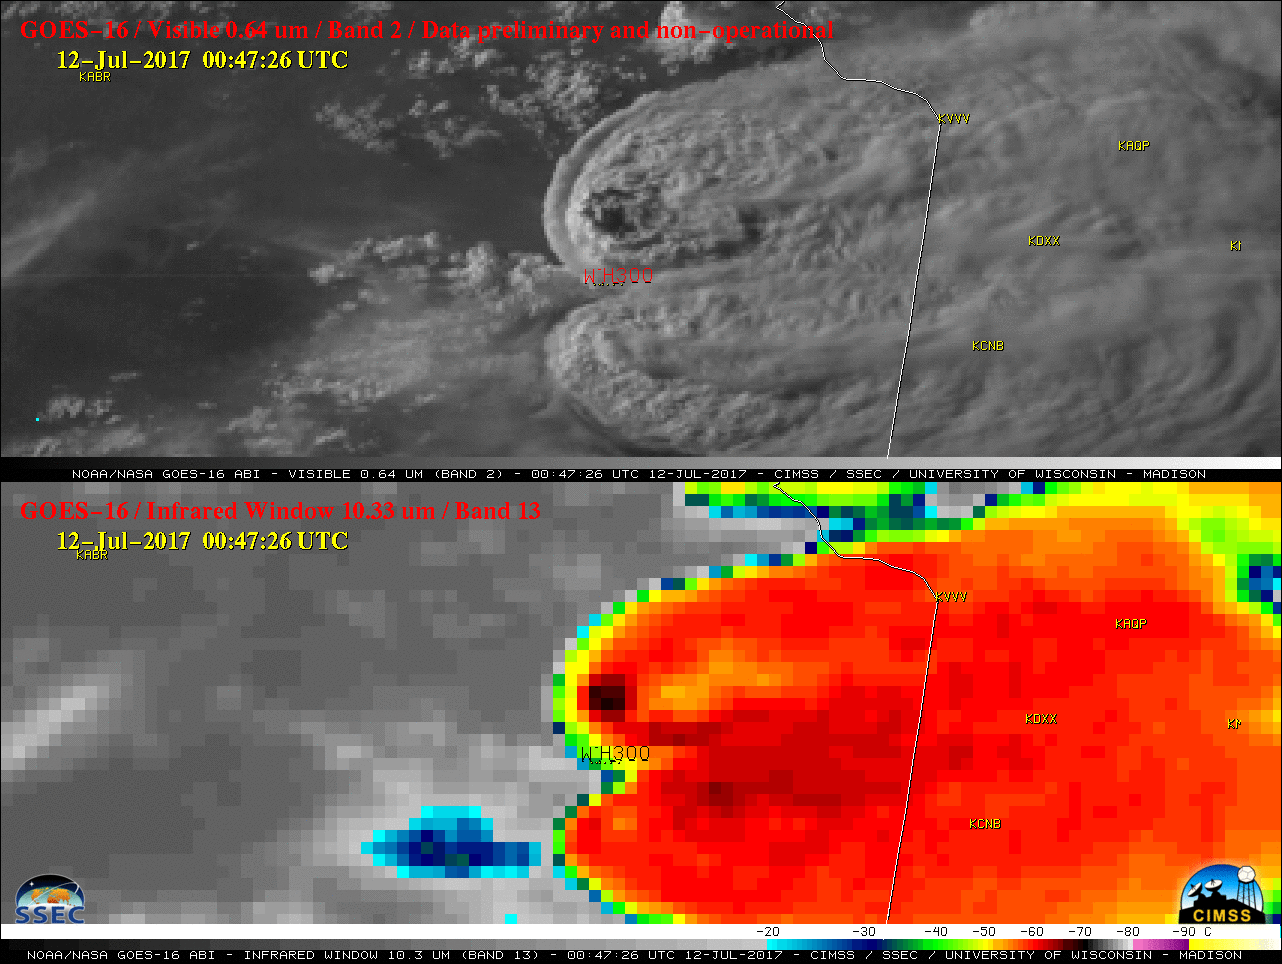 GOES-16 Visible (0.64 µm, top) and Infrared Window (10.3 µm, bottom) images, with SPC storm reports plotted in red (on Visible) and black (on Infrared) [click to play MP4 animation]